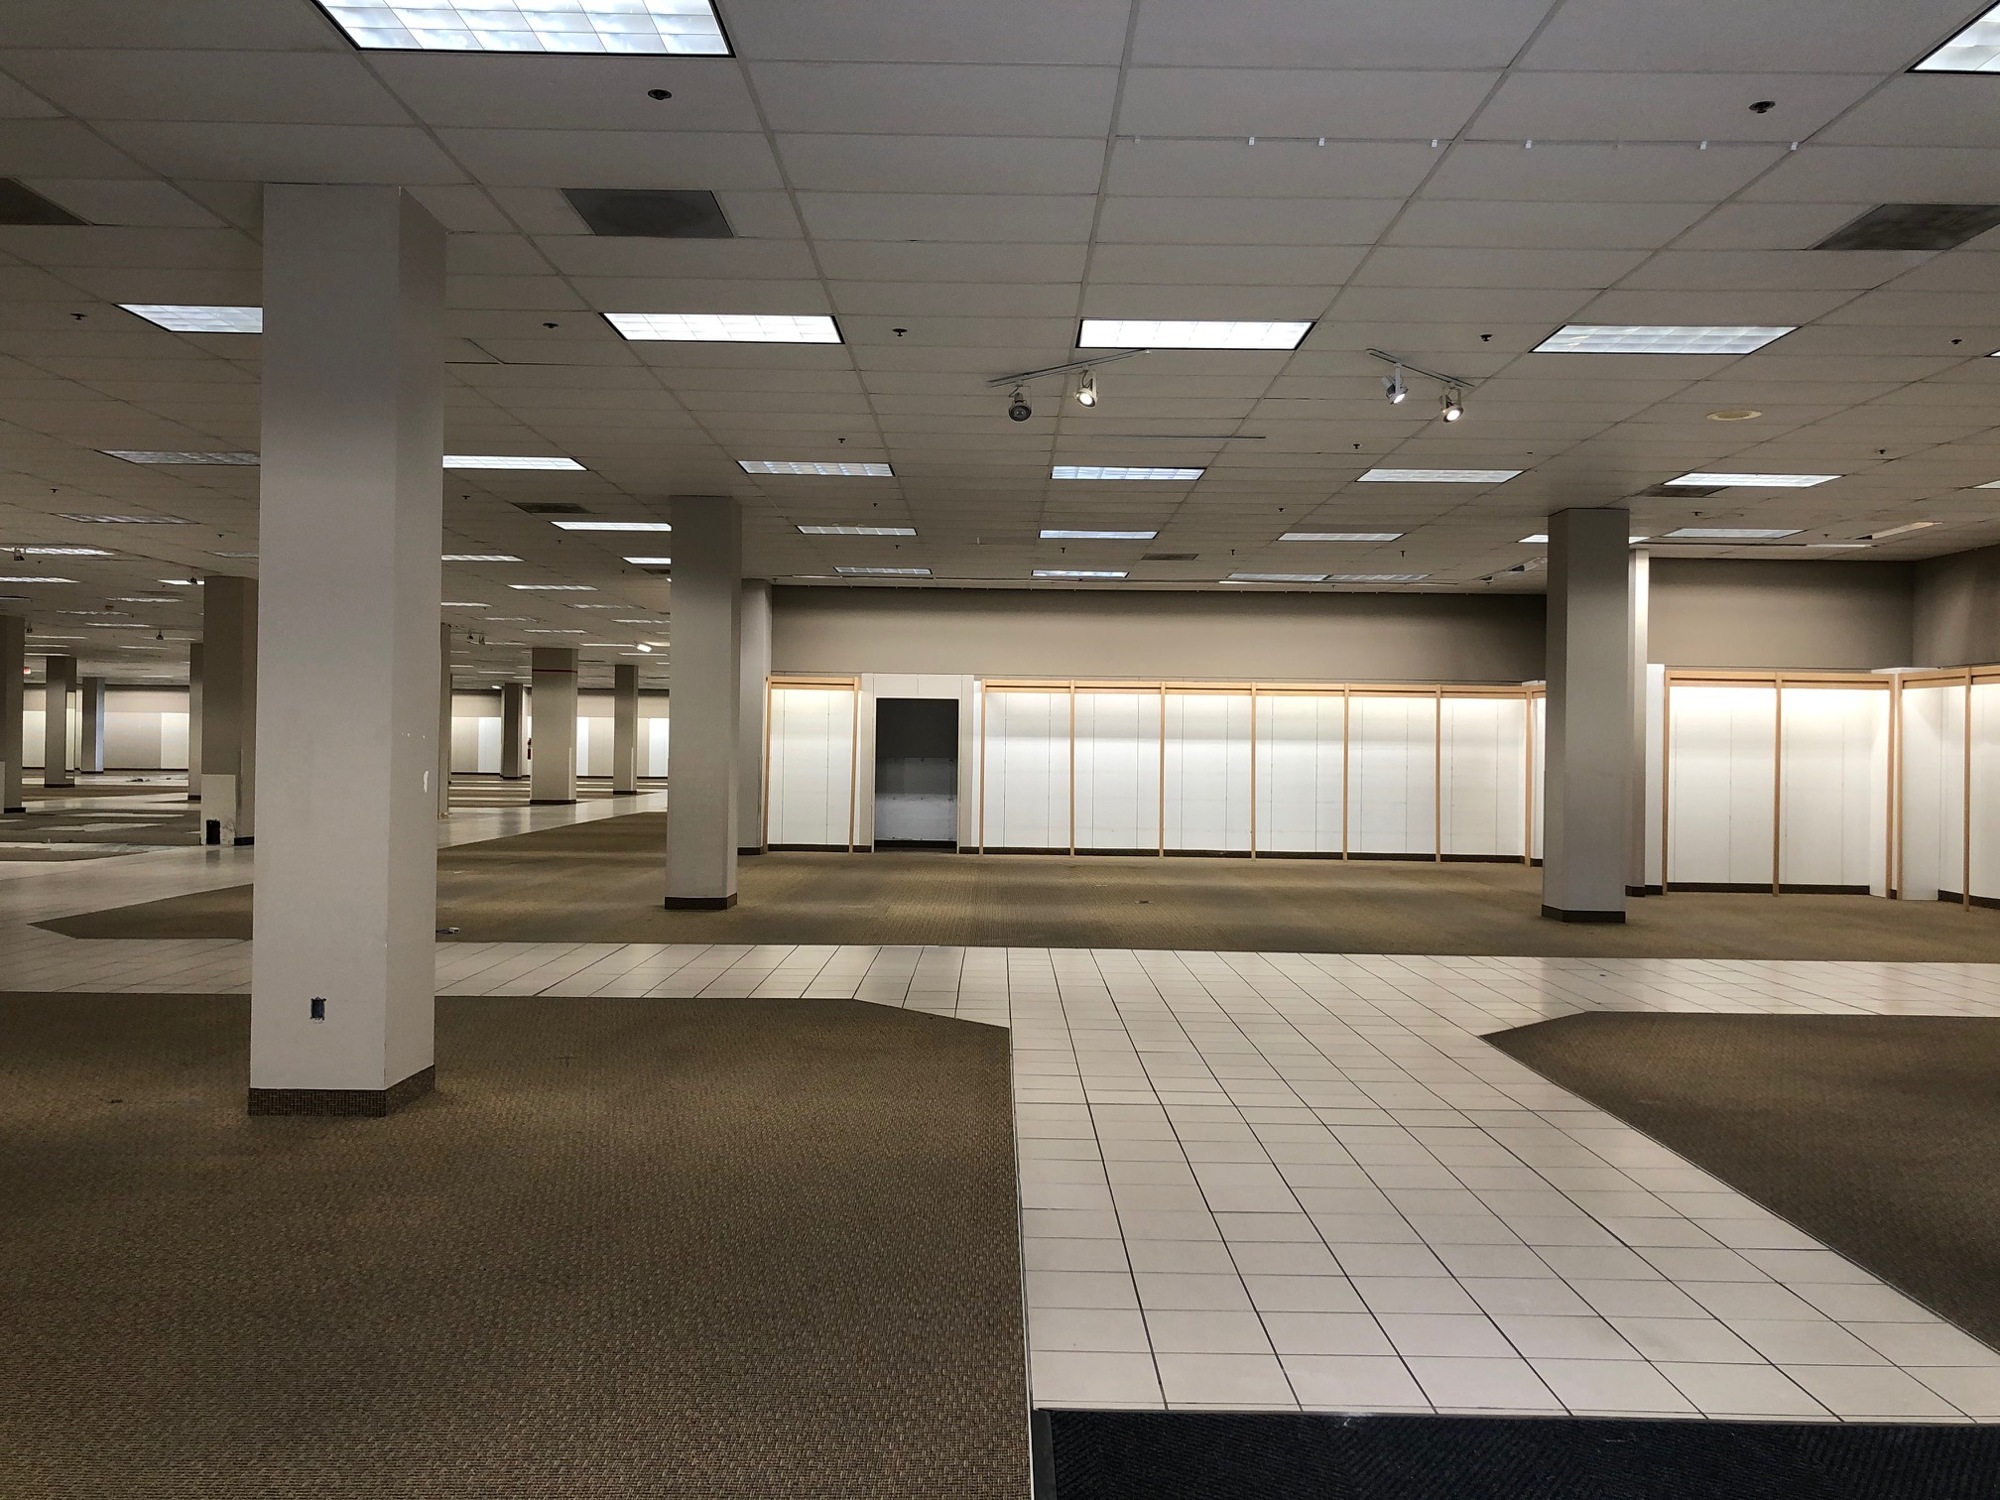 The Sears at The Avenues mall was empty on Dec. 6.